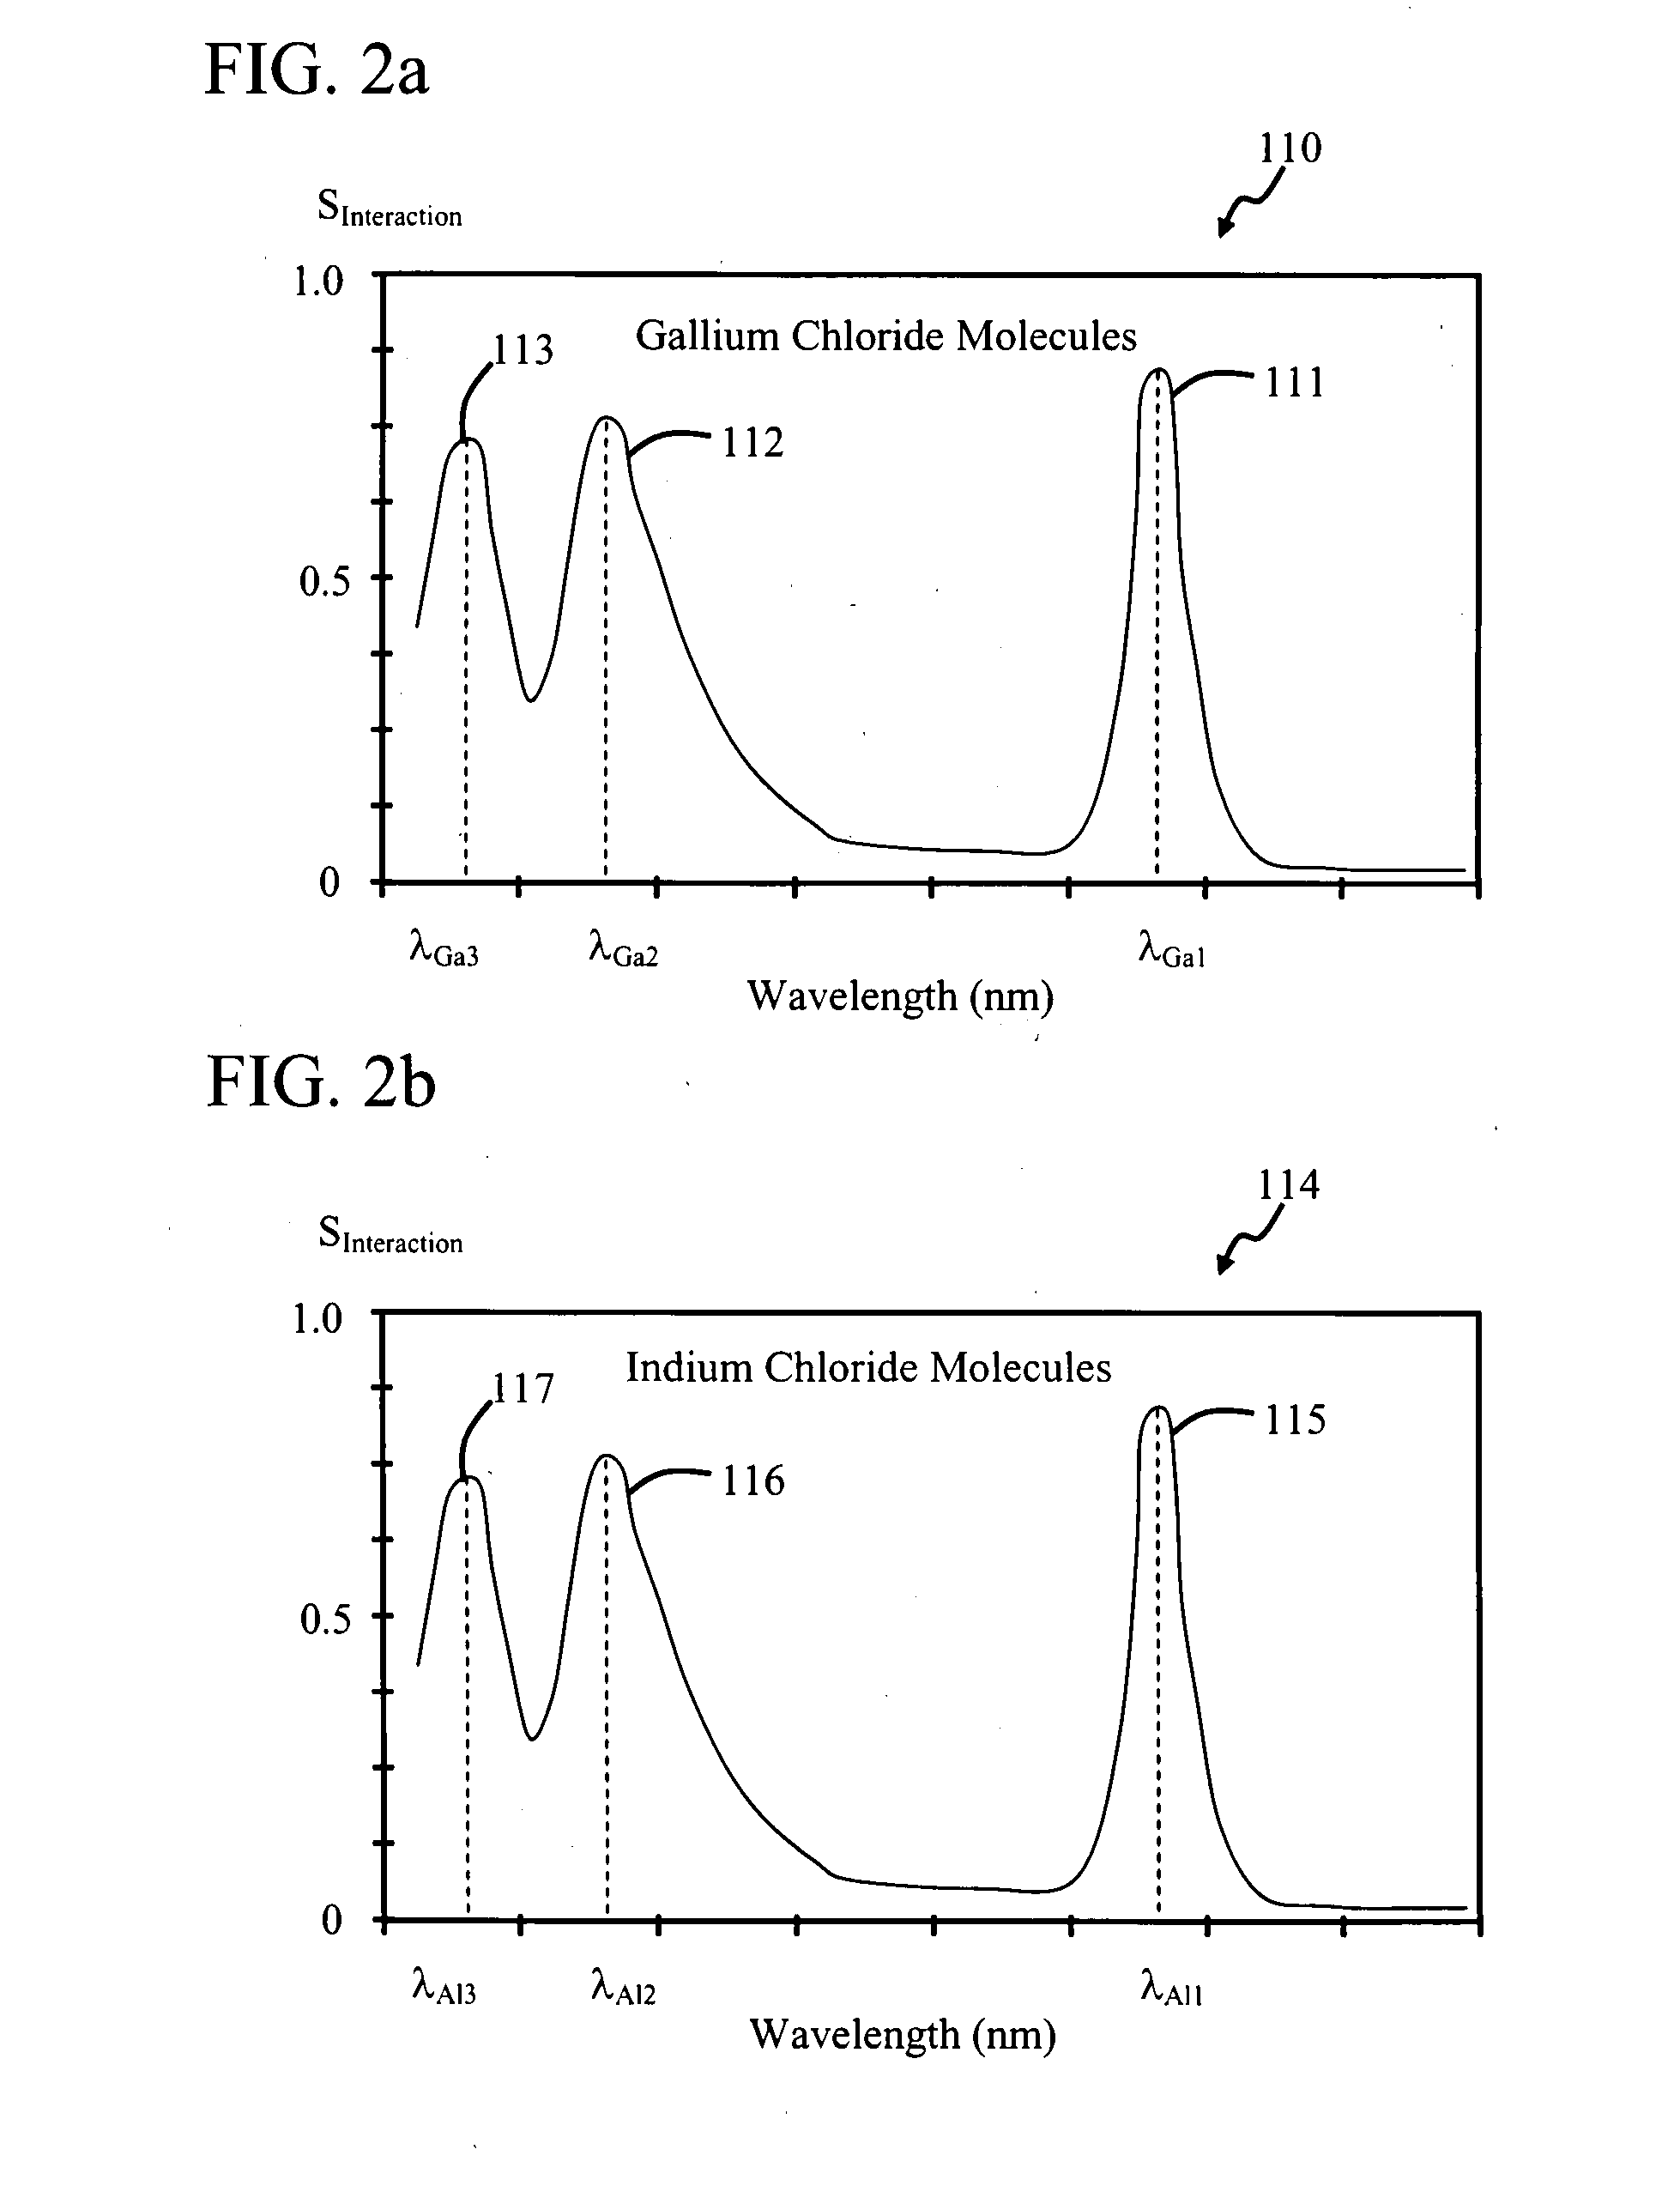 UV absorption based monitor and control of chloride gas stream